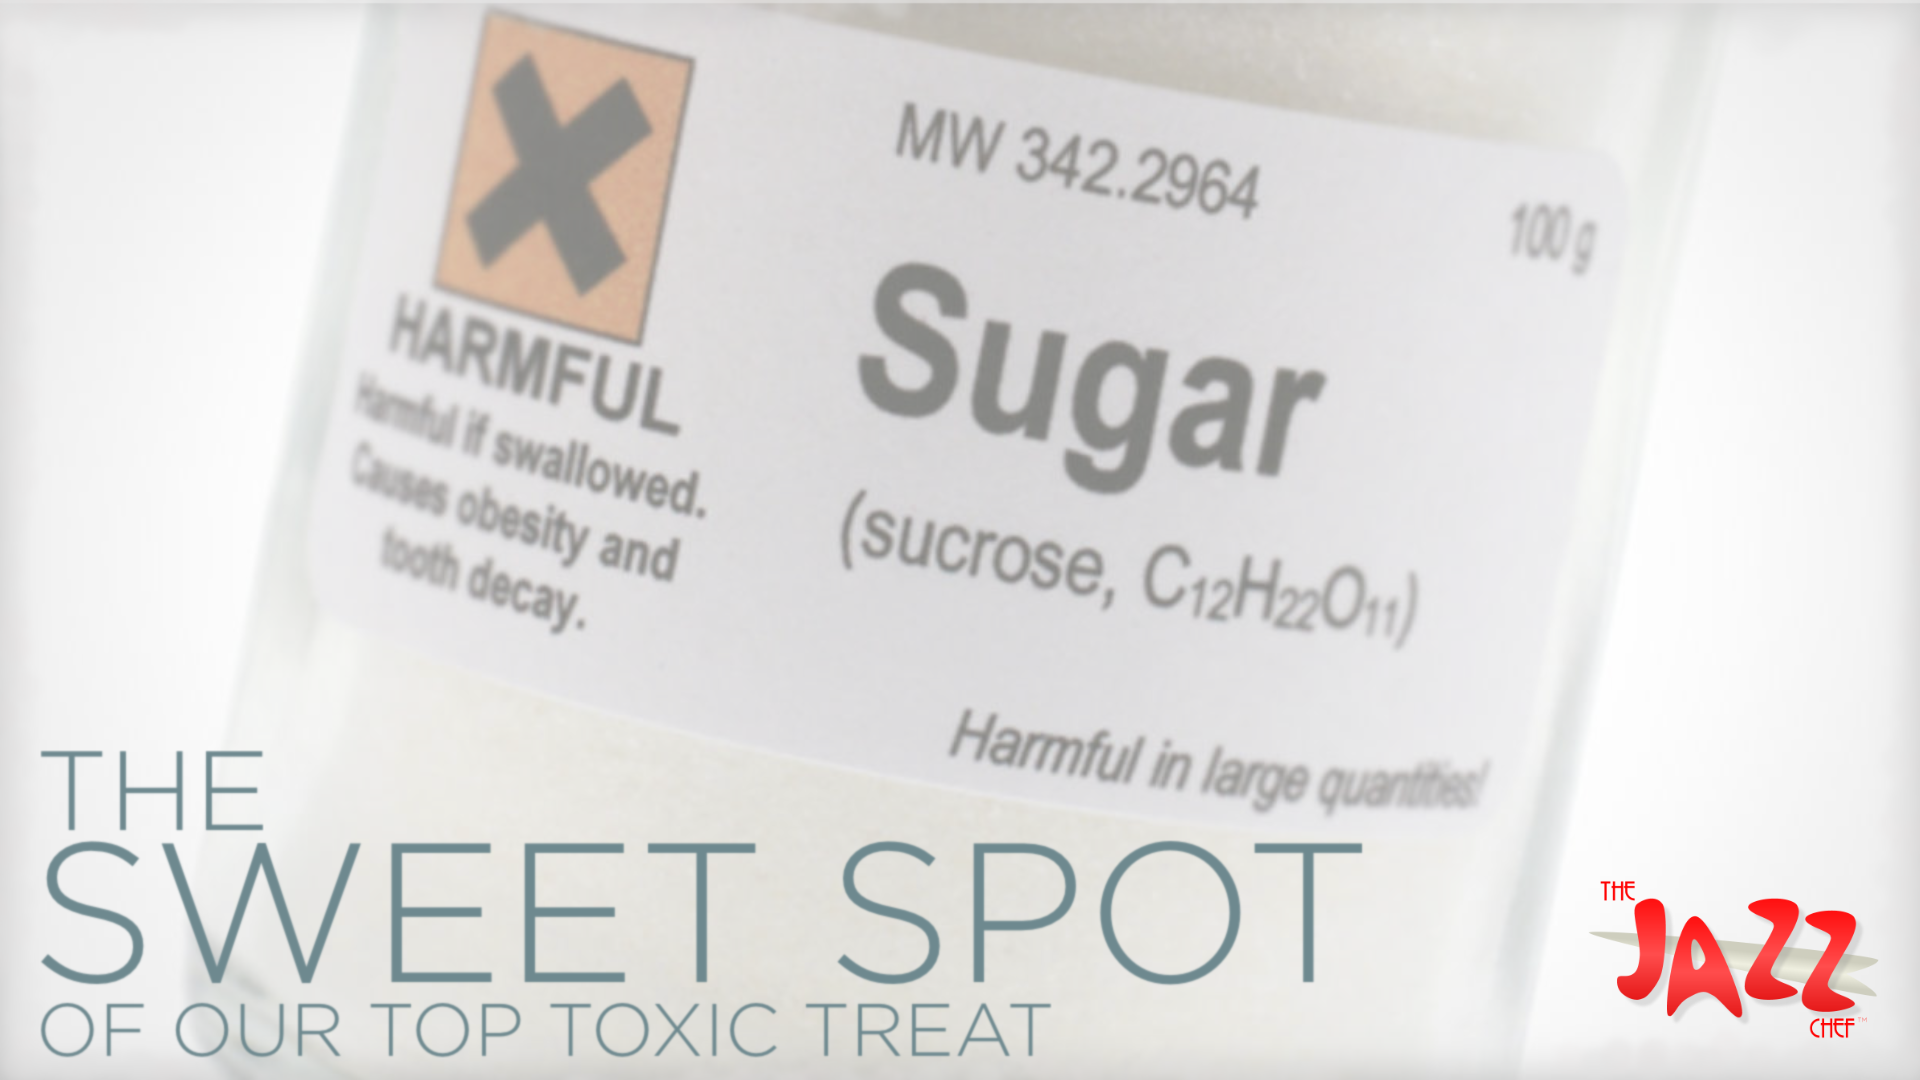 The Sweet Spot of our Top Toxic Treat